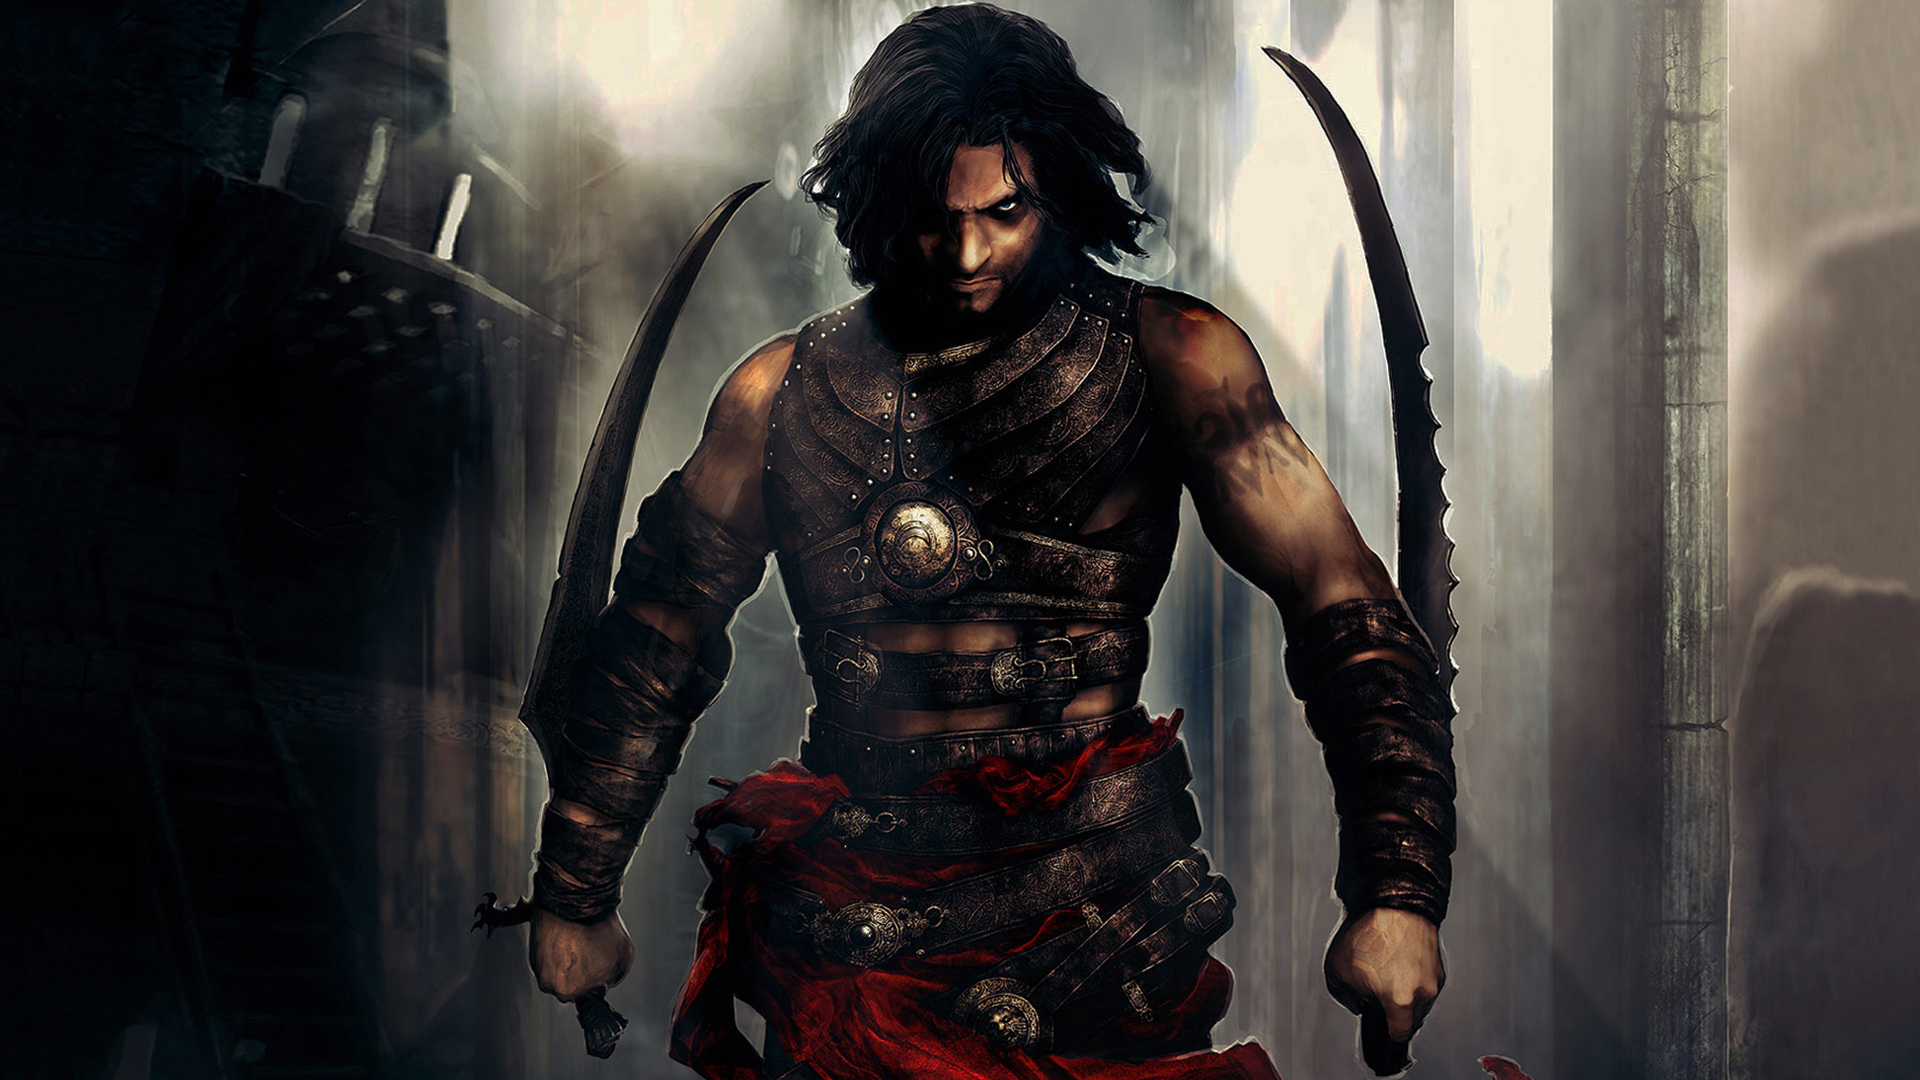 Prince Of Persia warrior holding a sword in a striking pose